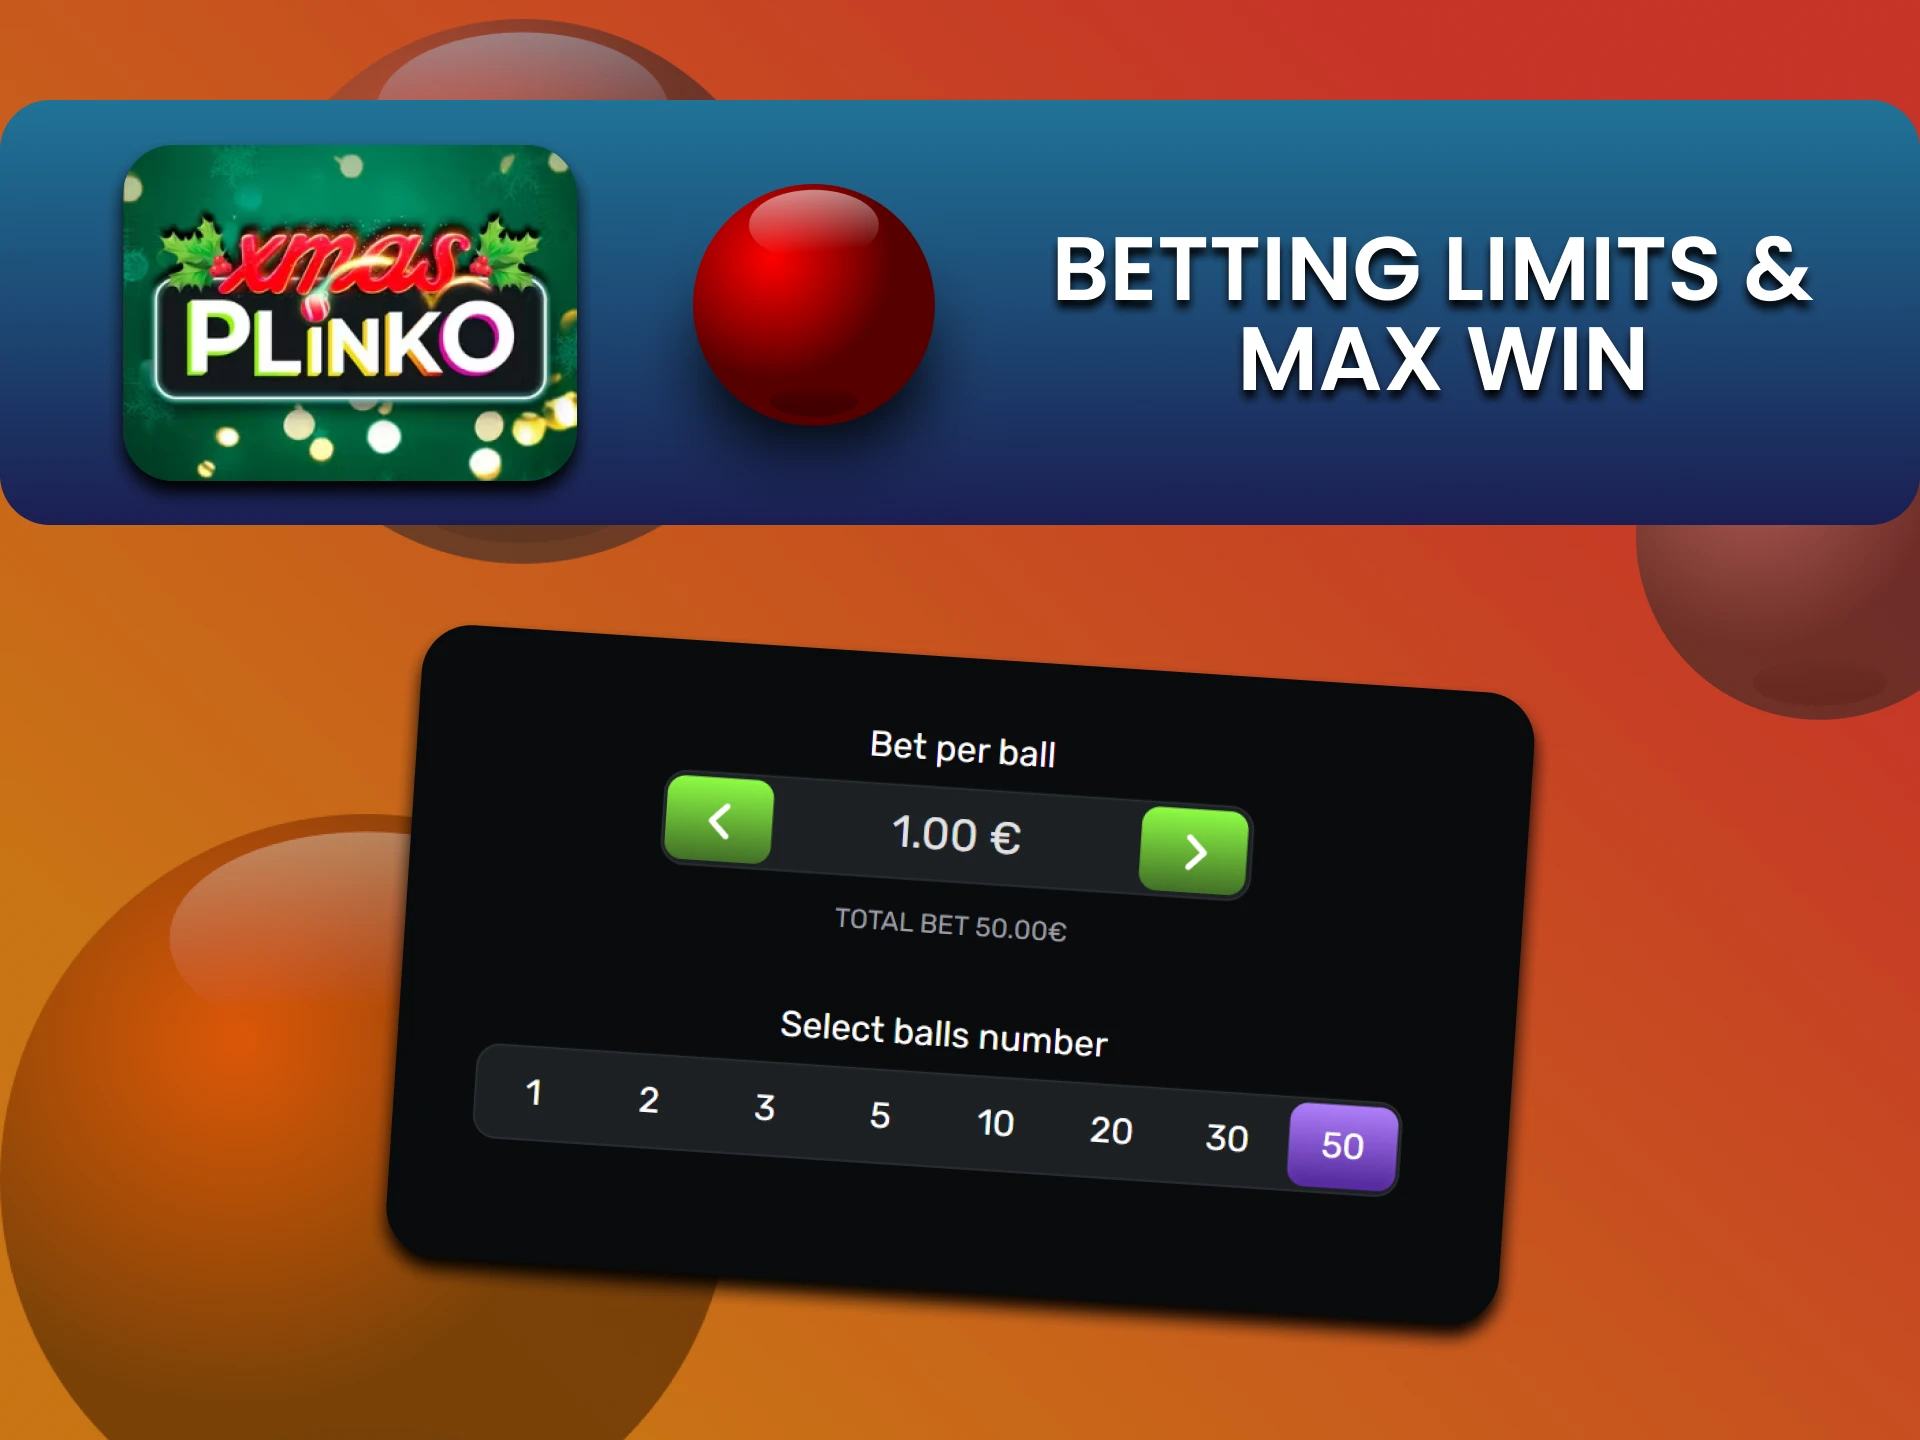 Find out about the betting limits in the Plinko Xmas game.